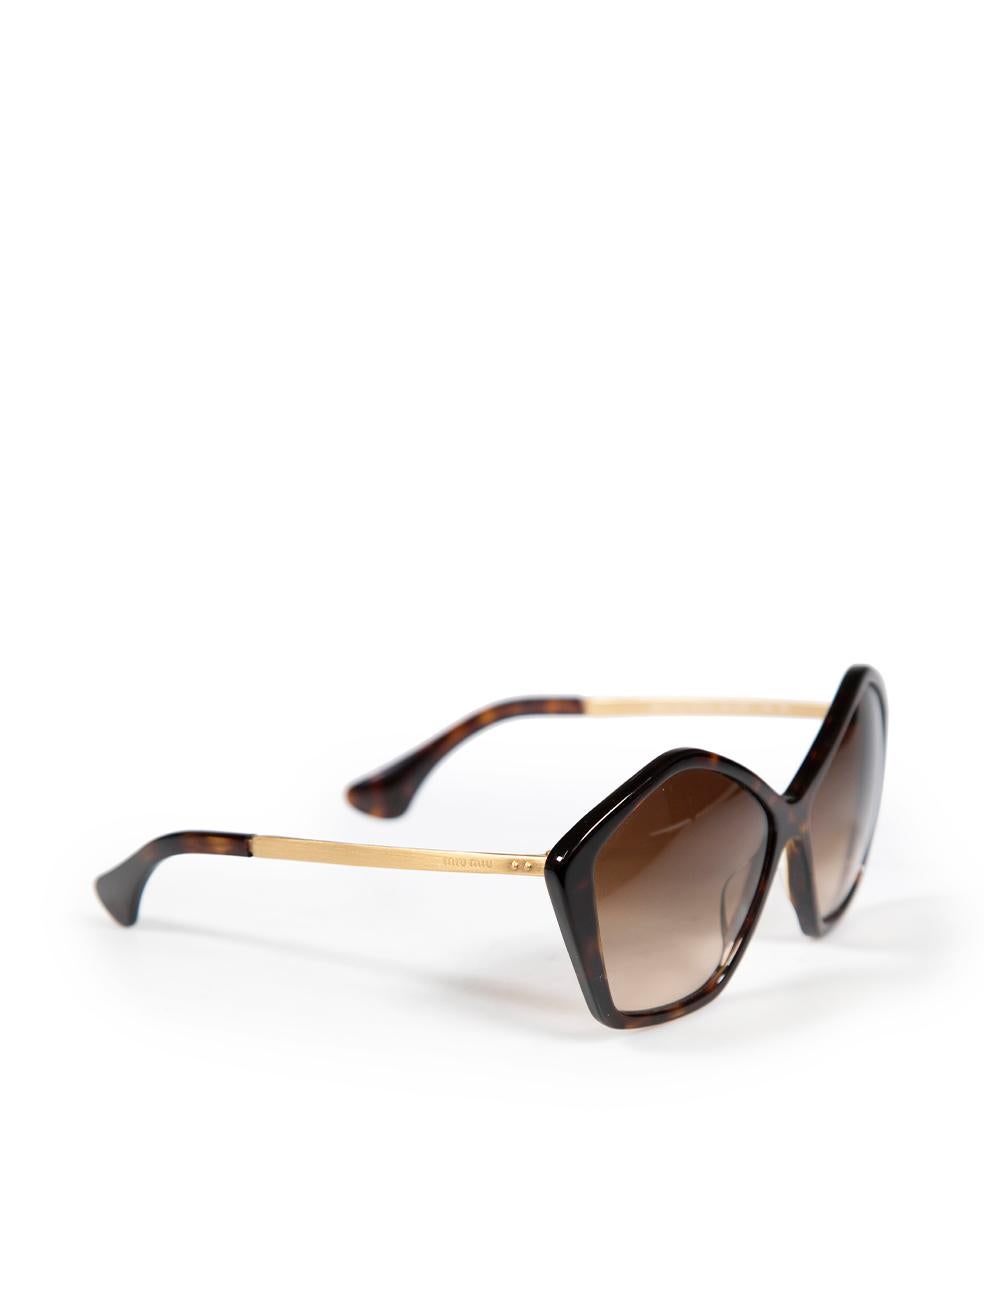 CONDITION is Good. General wear to sunglasses is evident. Moderate signs of wear to the lenses and arms with scratches on this used Miu Miu designer resale item. These sunglasses come with original case.
 
 
 
 Details
 
 
 Brown
 
 Plastic
 
